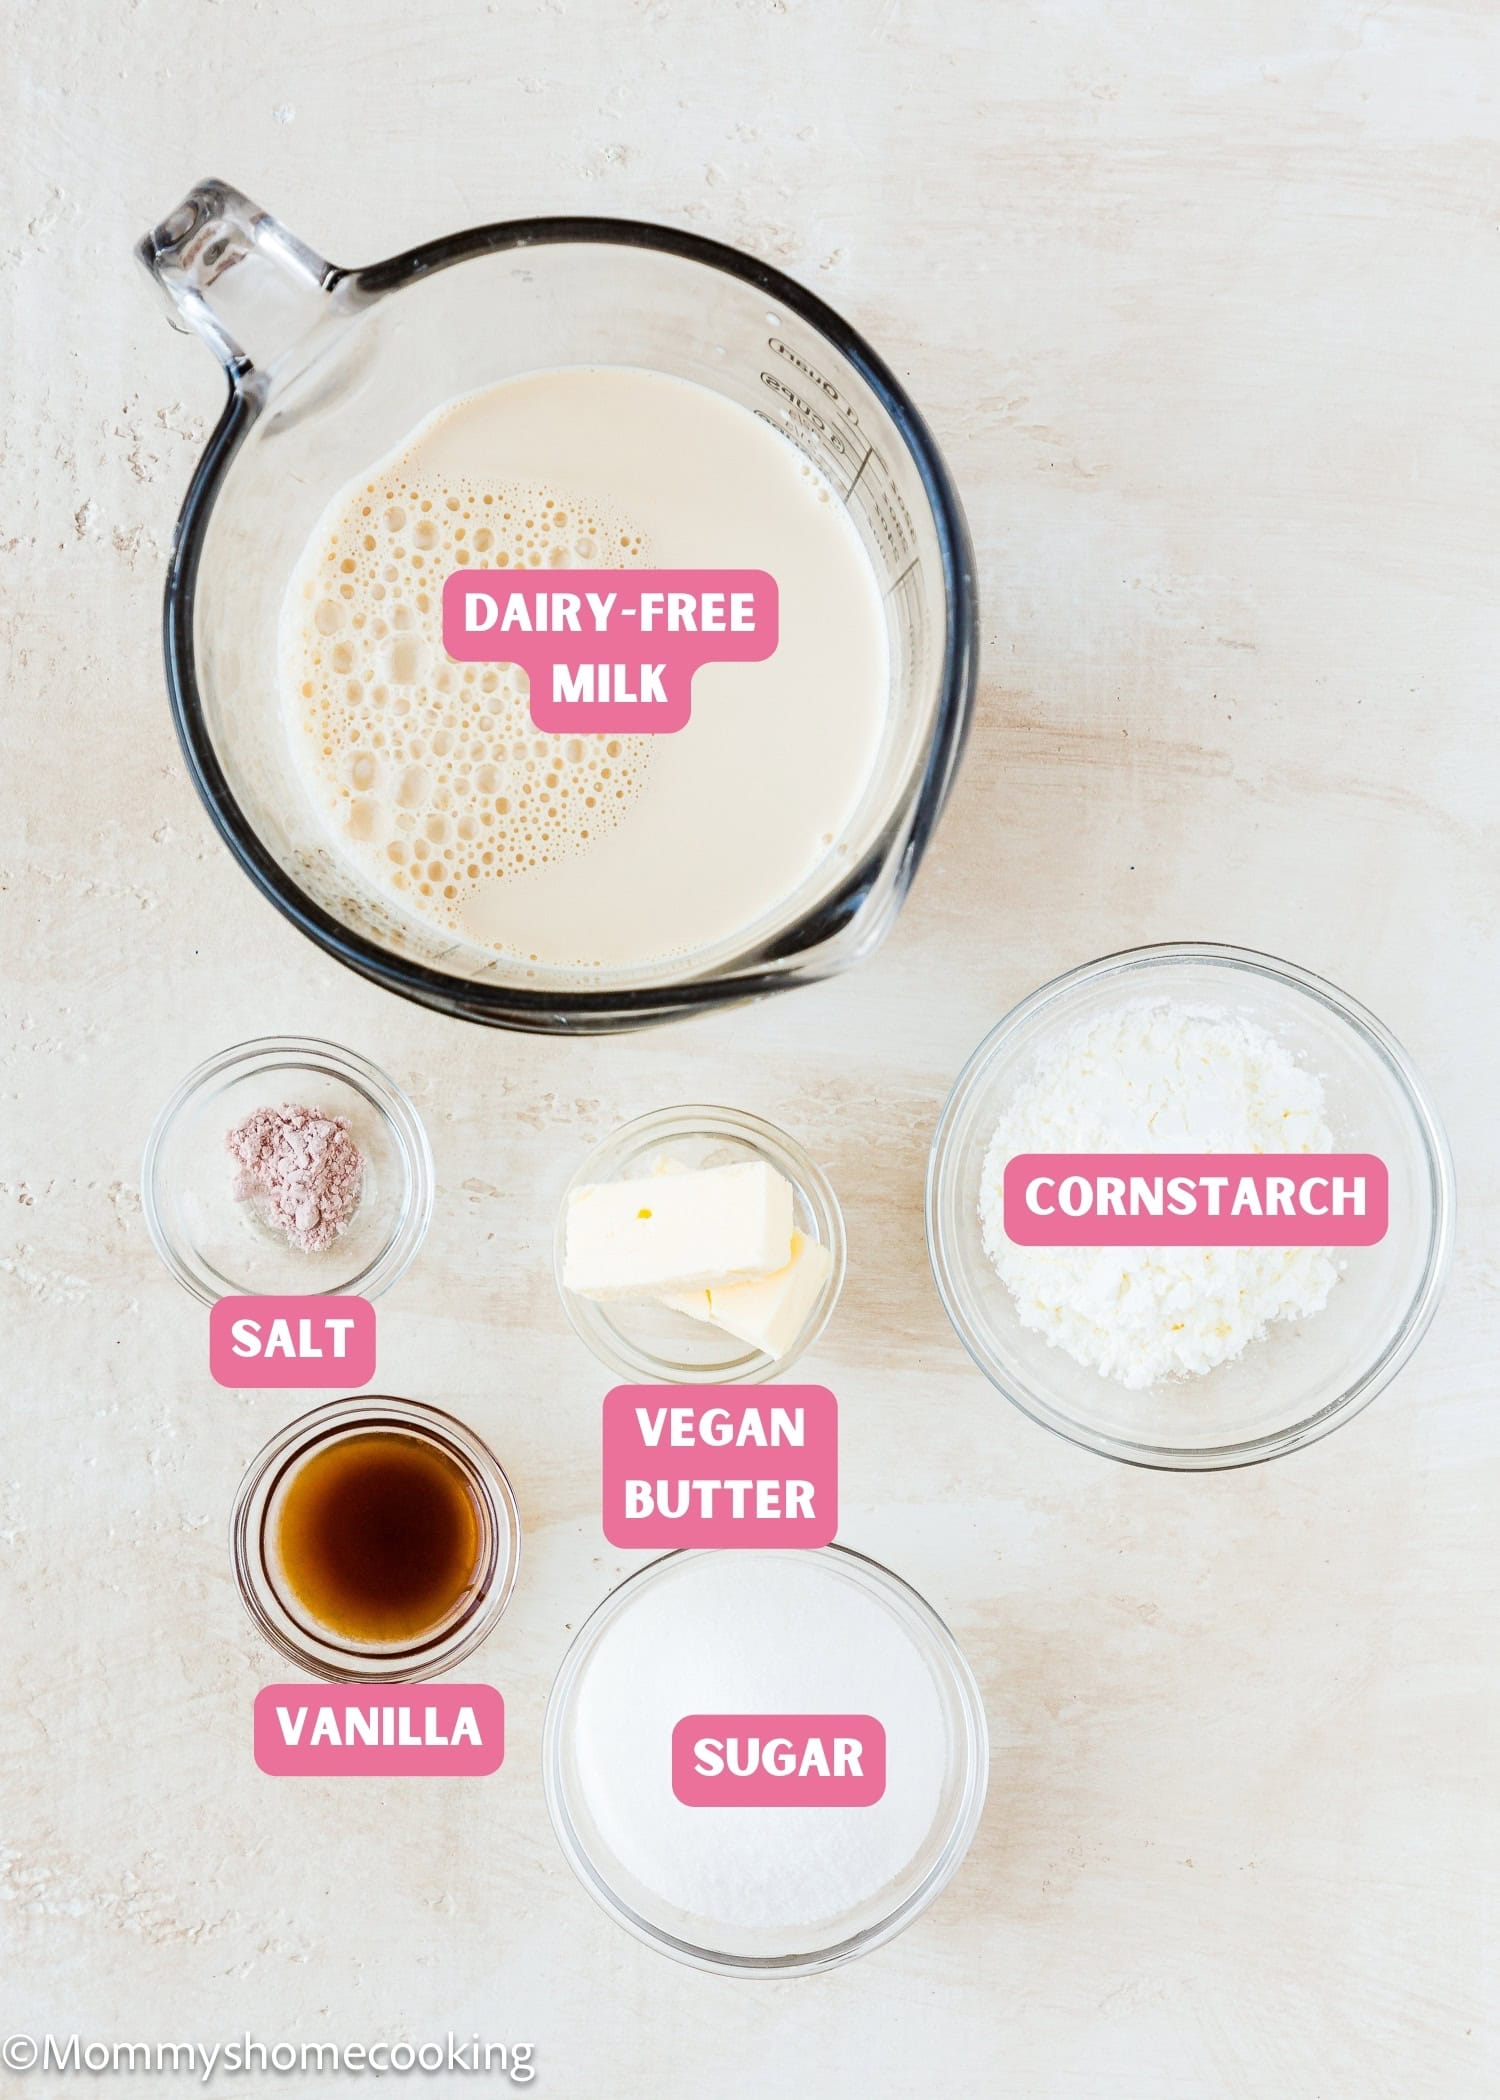 Ingredients needed to make dairy-free egg-free Vegan Pastry Cream with name tags.